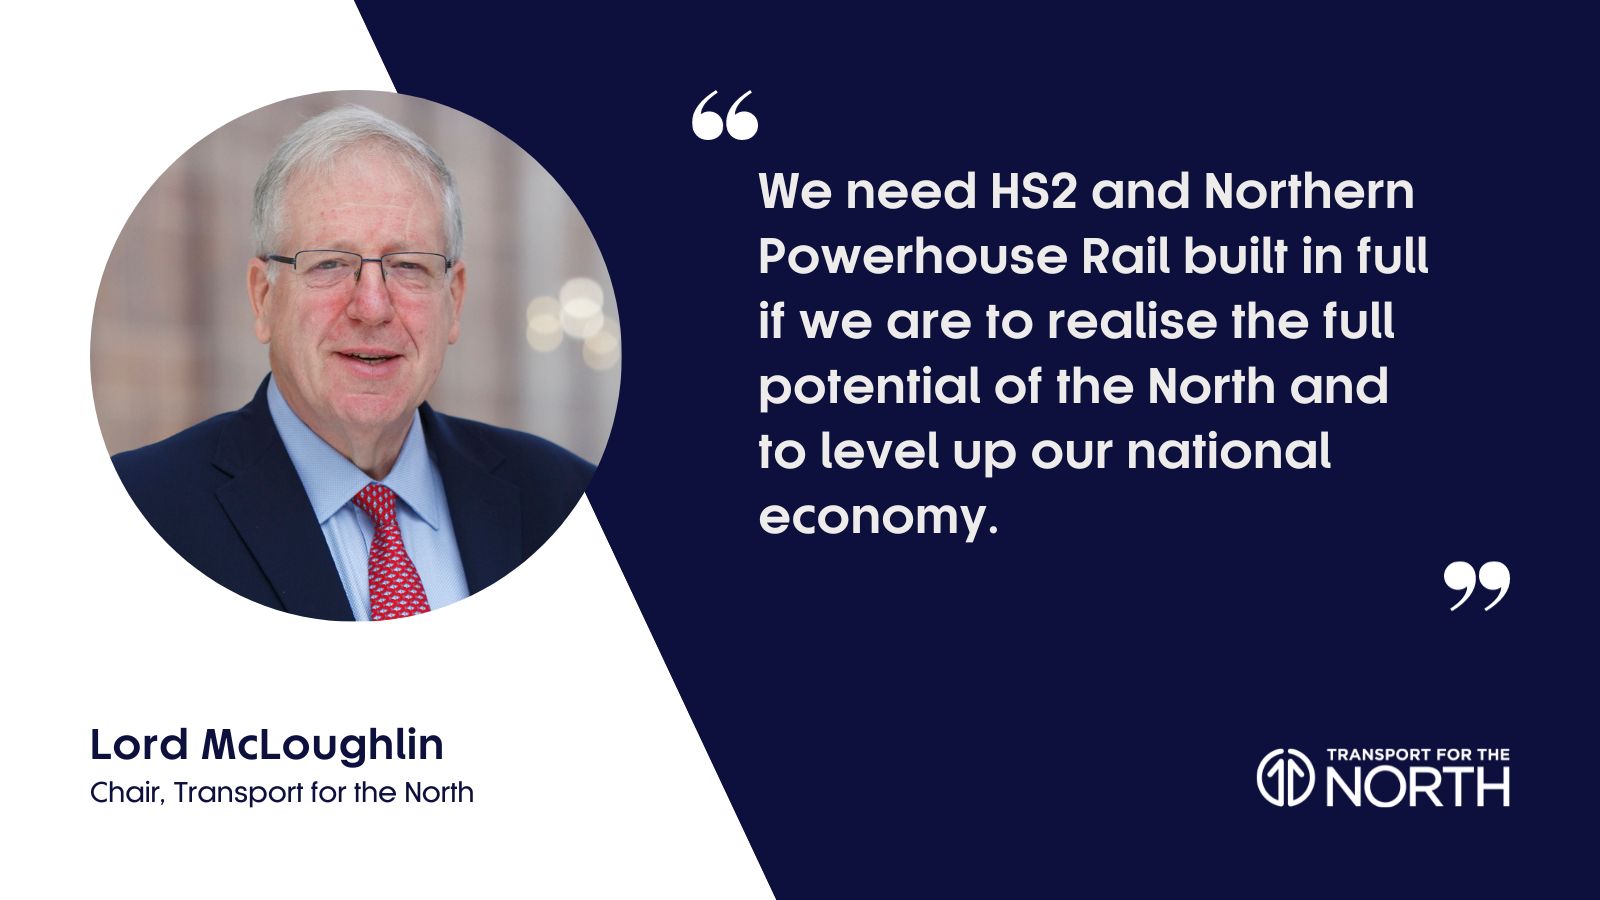 Lord McLoughlin on the need for HS2 and NPR in full